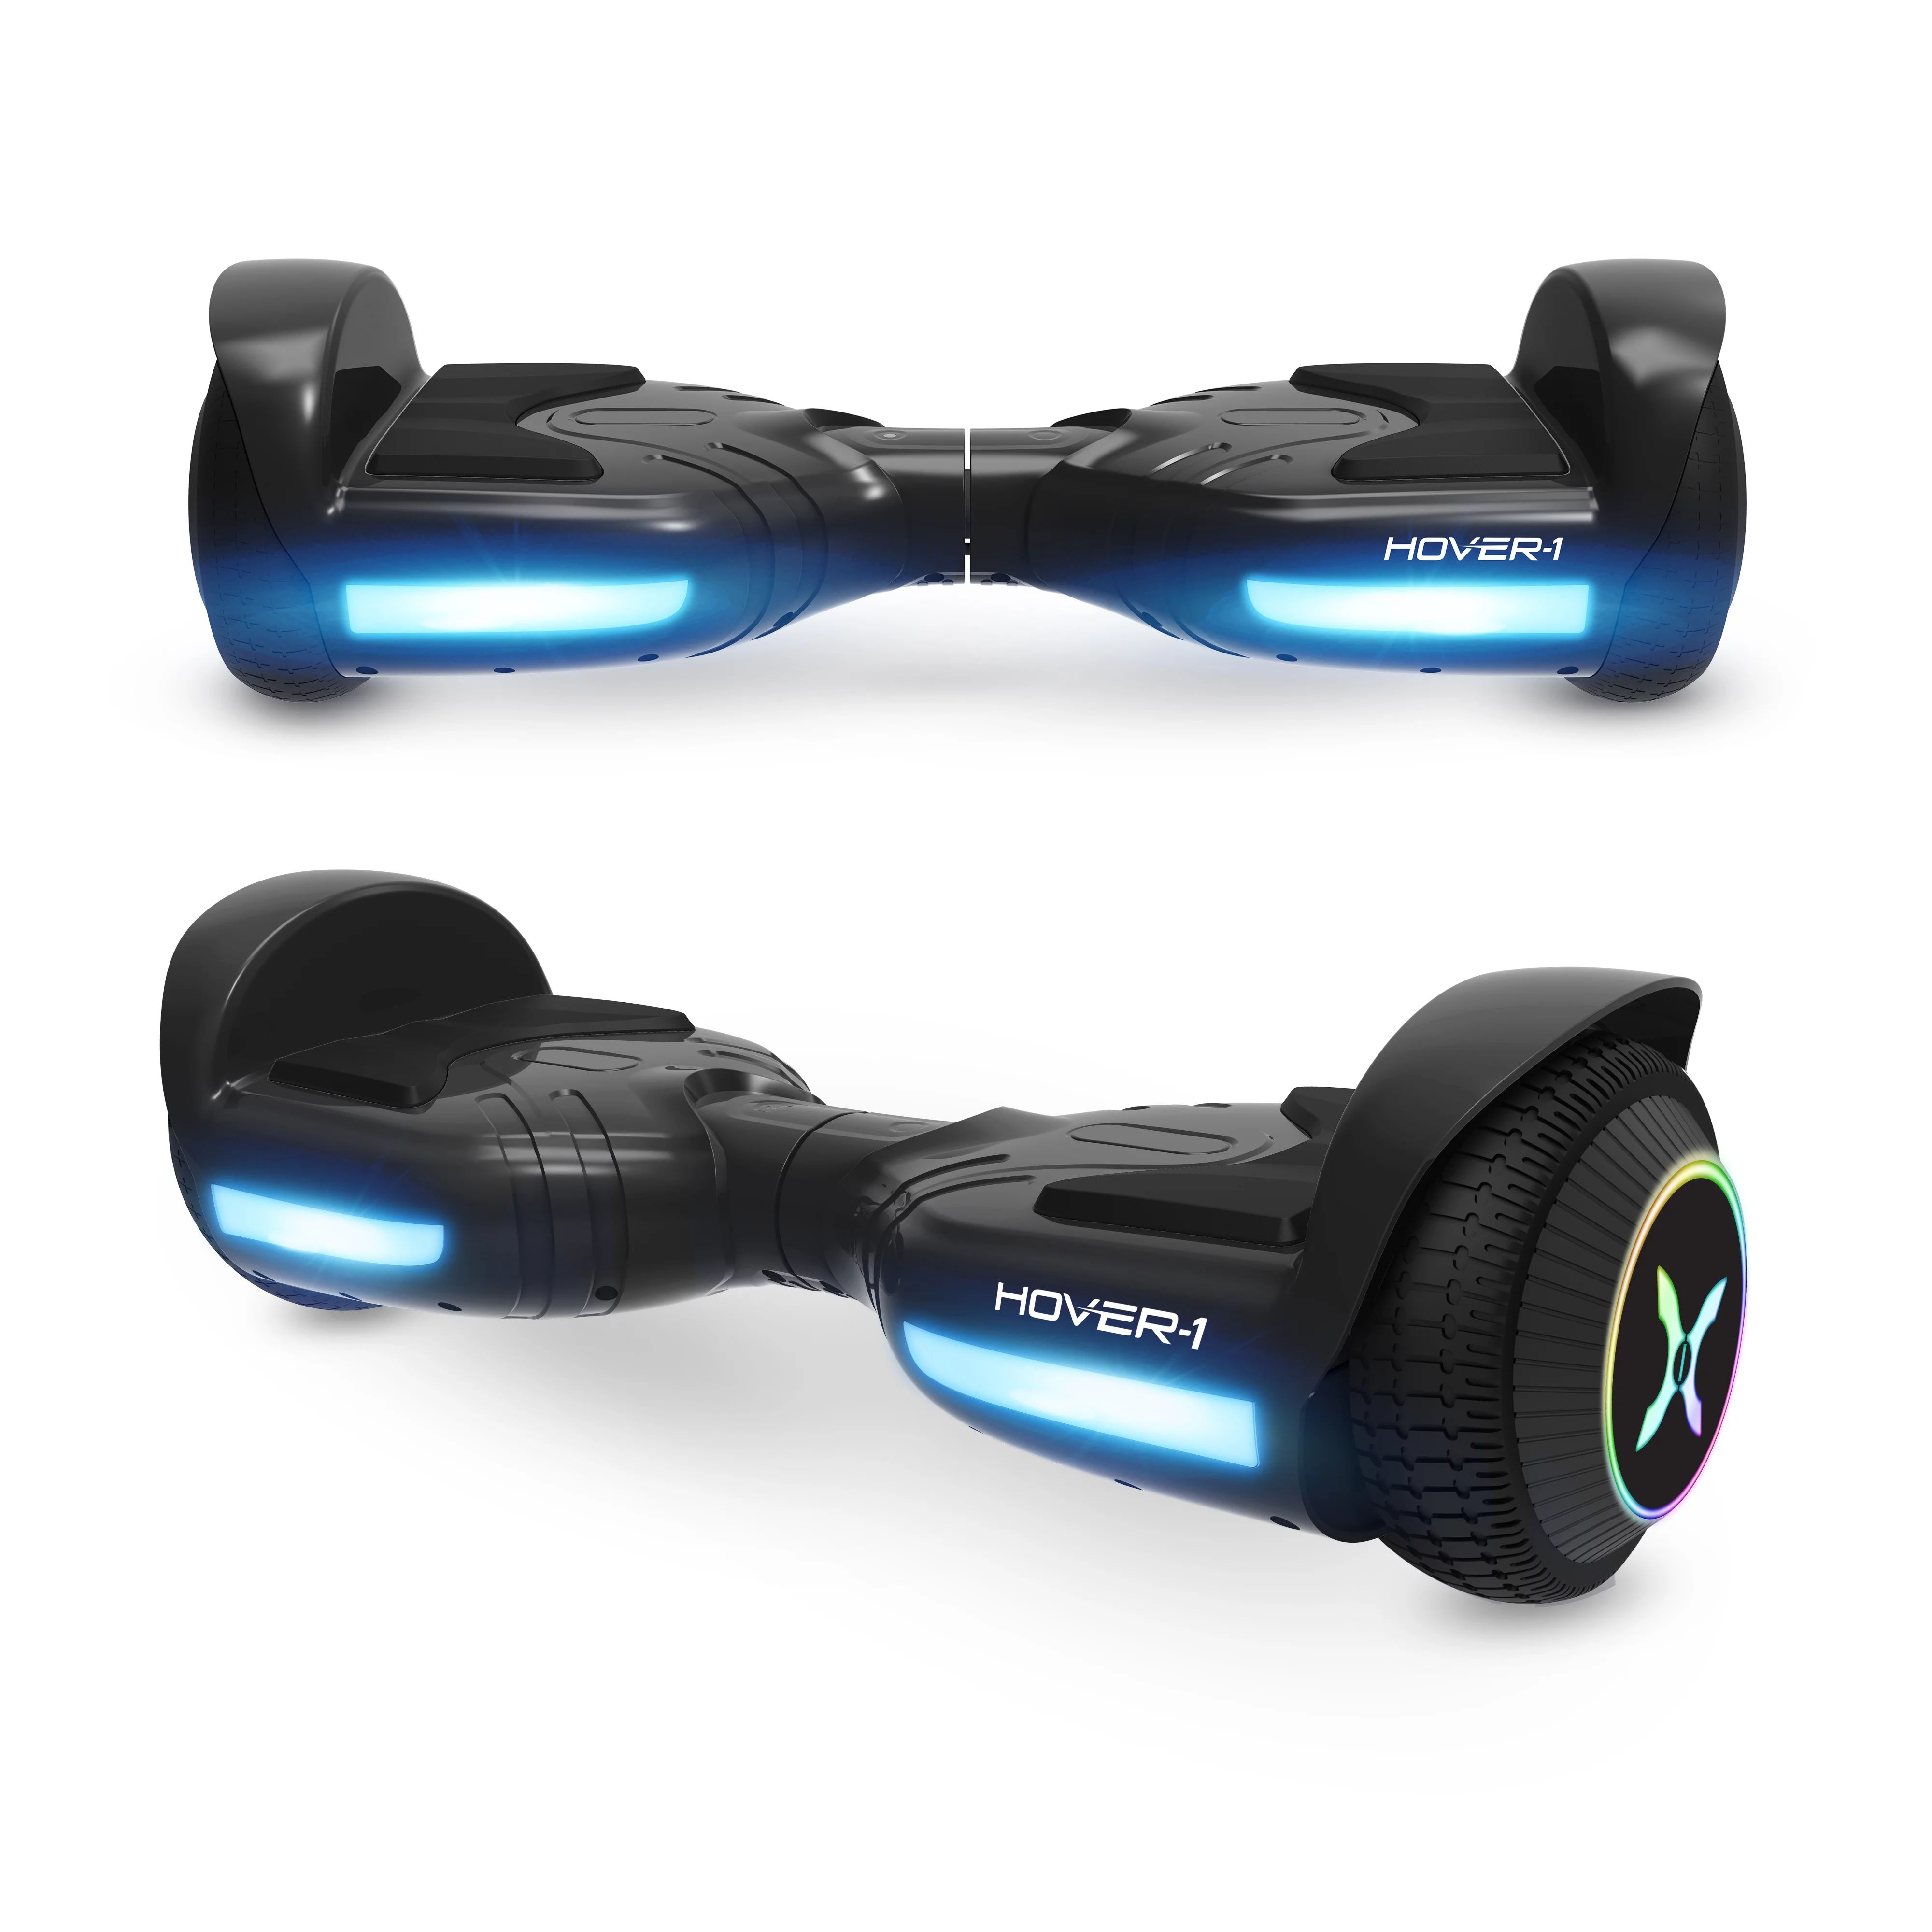 Hover-1 Nova Hoverboard, LED Wheels, LED Headlights,160 Max Weight, 7 MPH, 6 Mile Distance | Walmart (US)